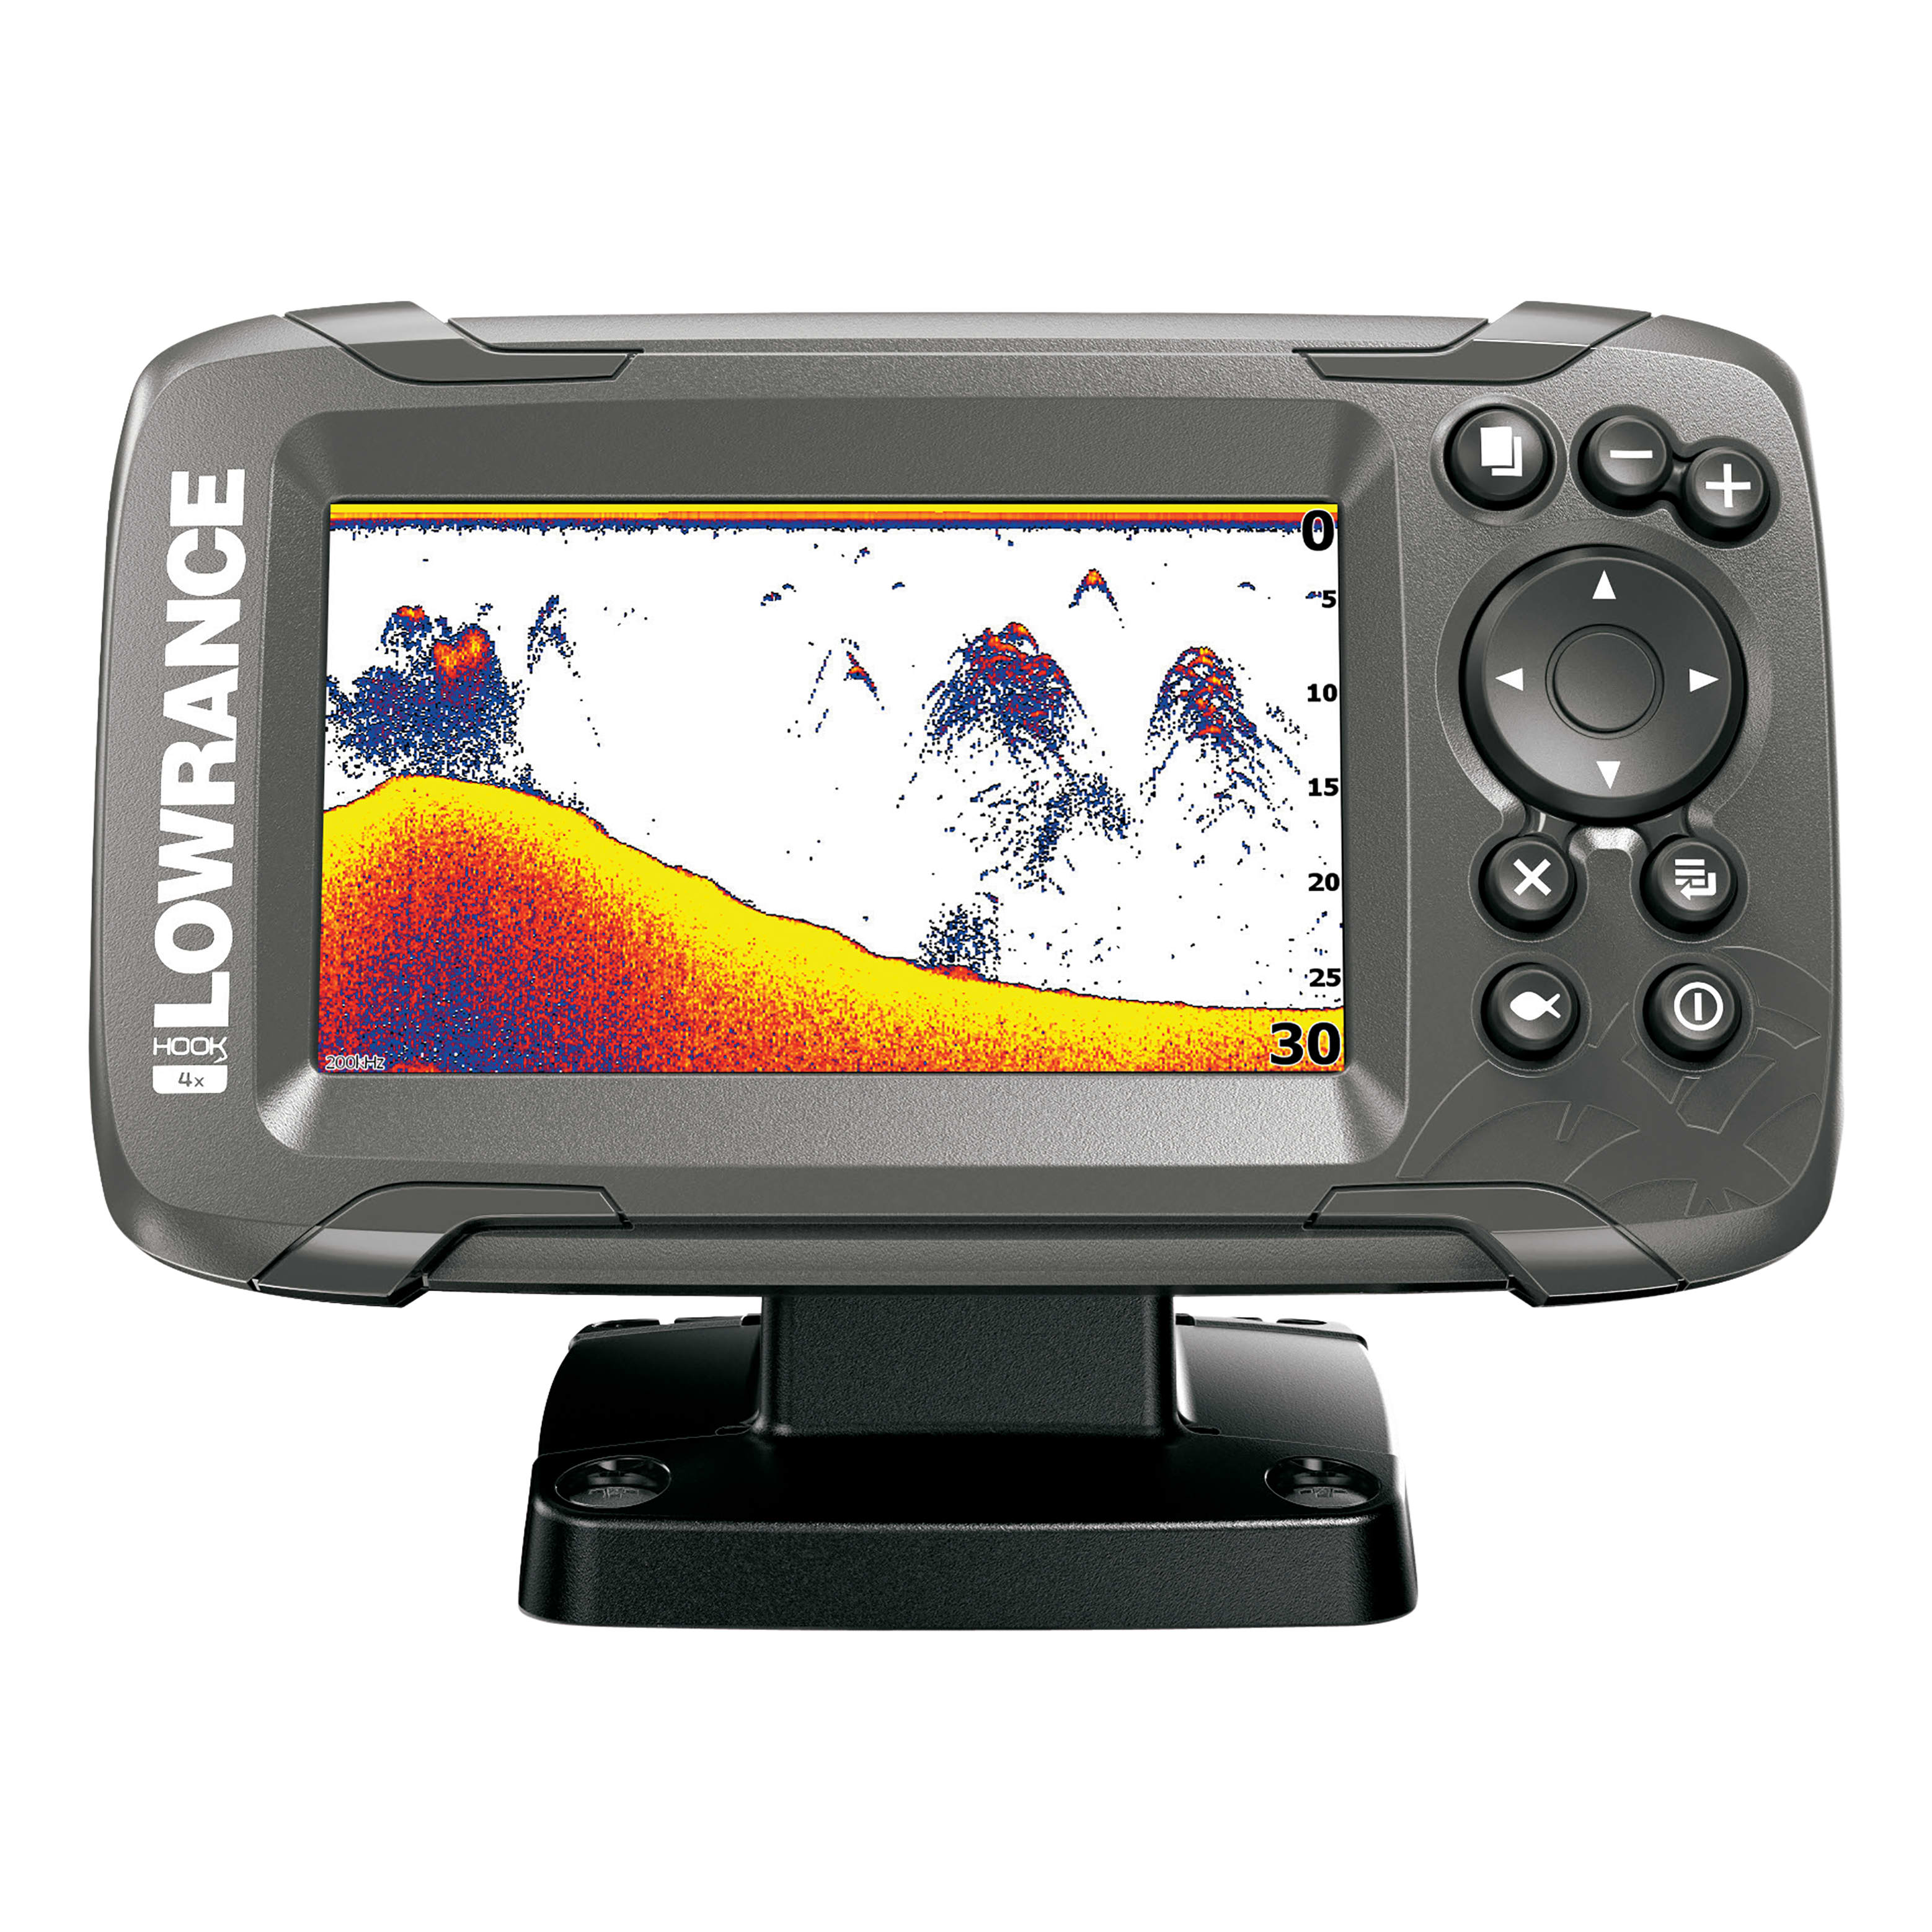 Lowrance Hook2 - 4x Fishfinder/GPS with Bullet Transducer - 000-14014-001